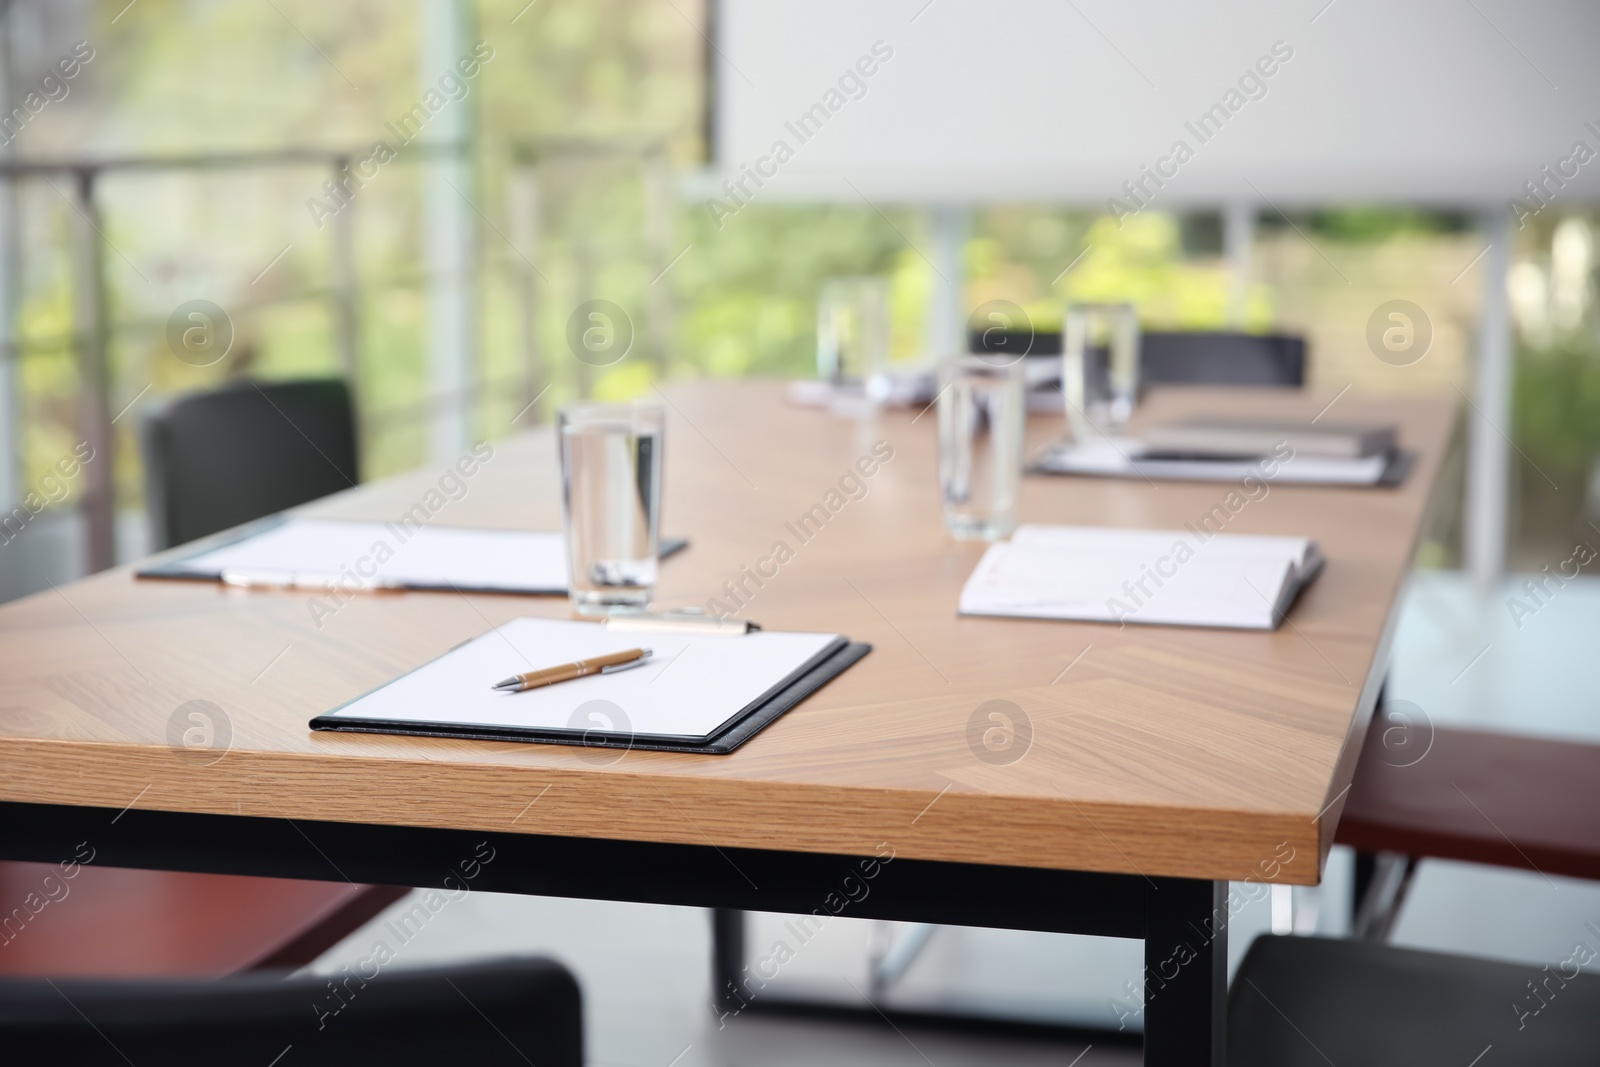 Photo of Clipboards and glasses of water on wooden table in modern office